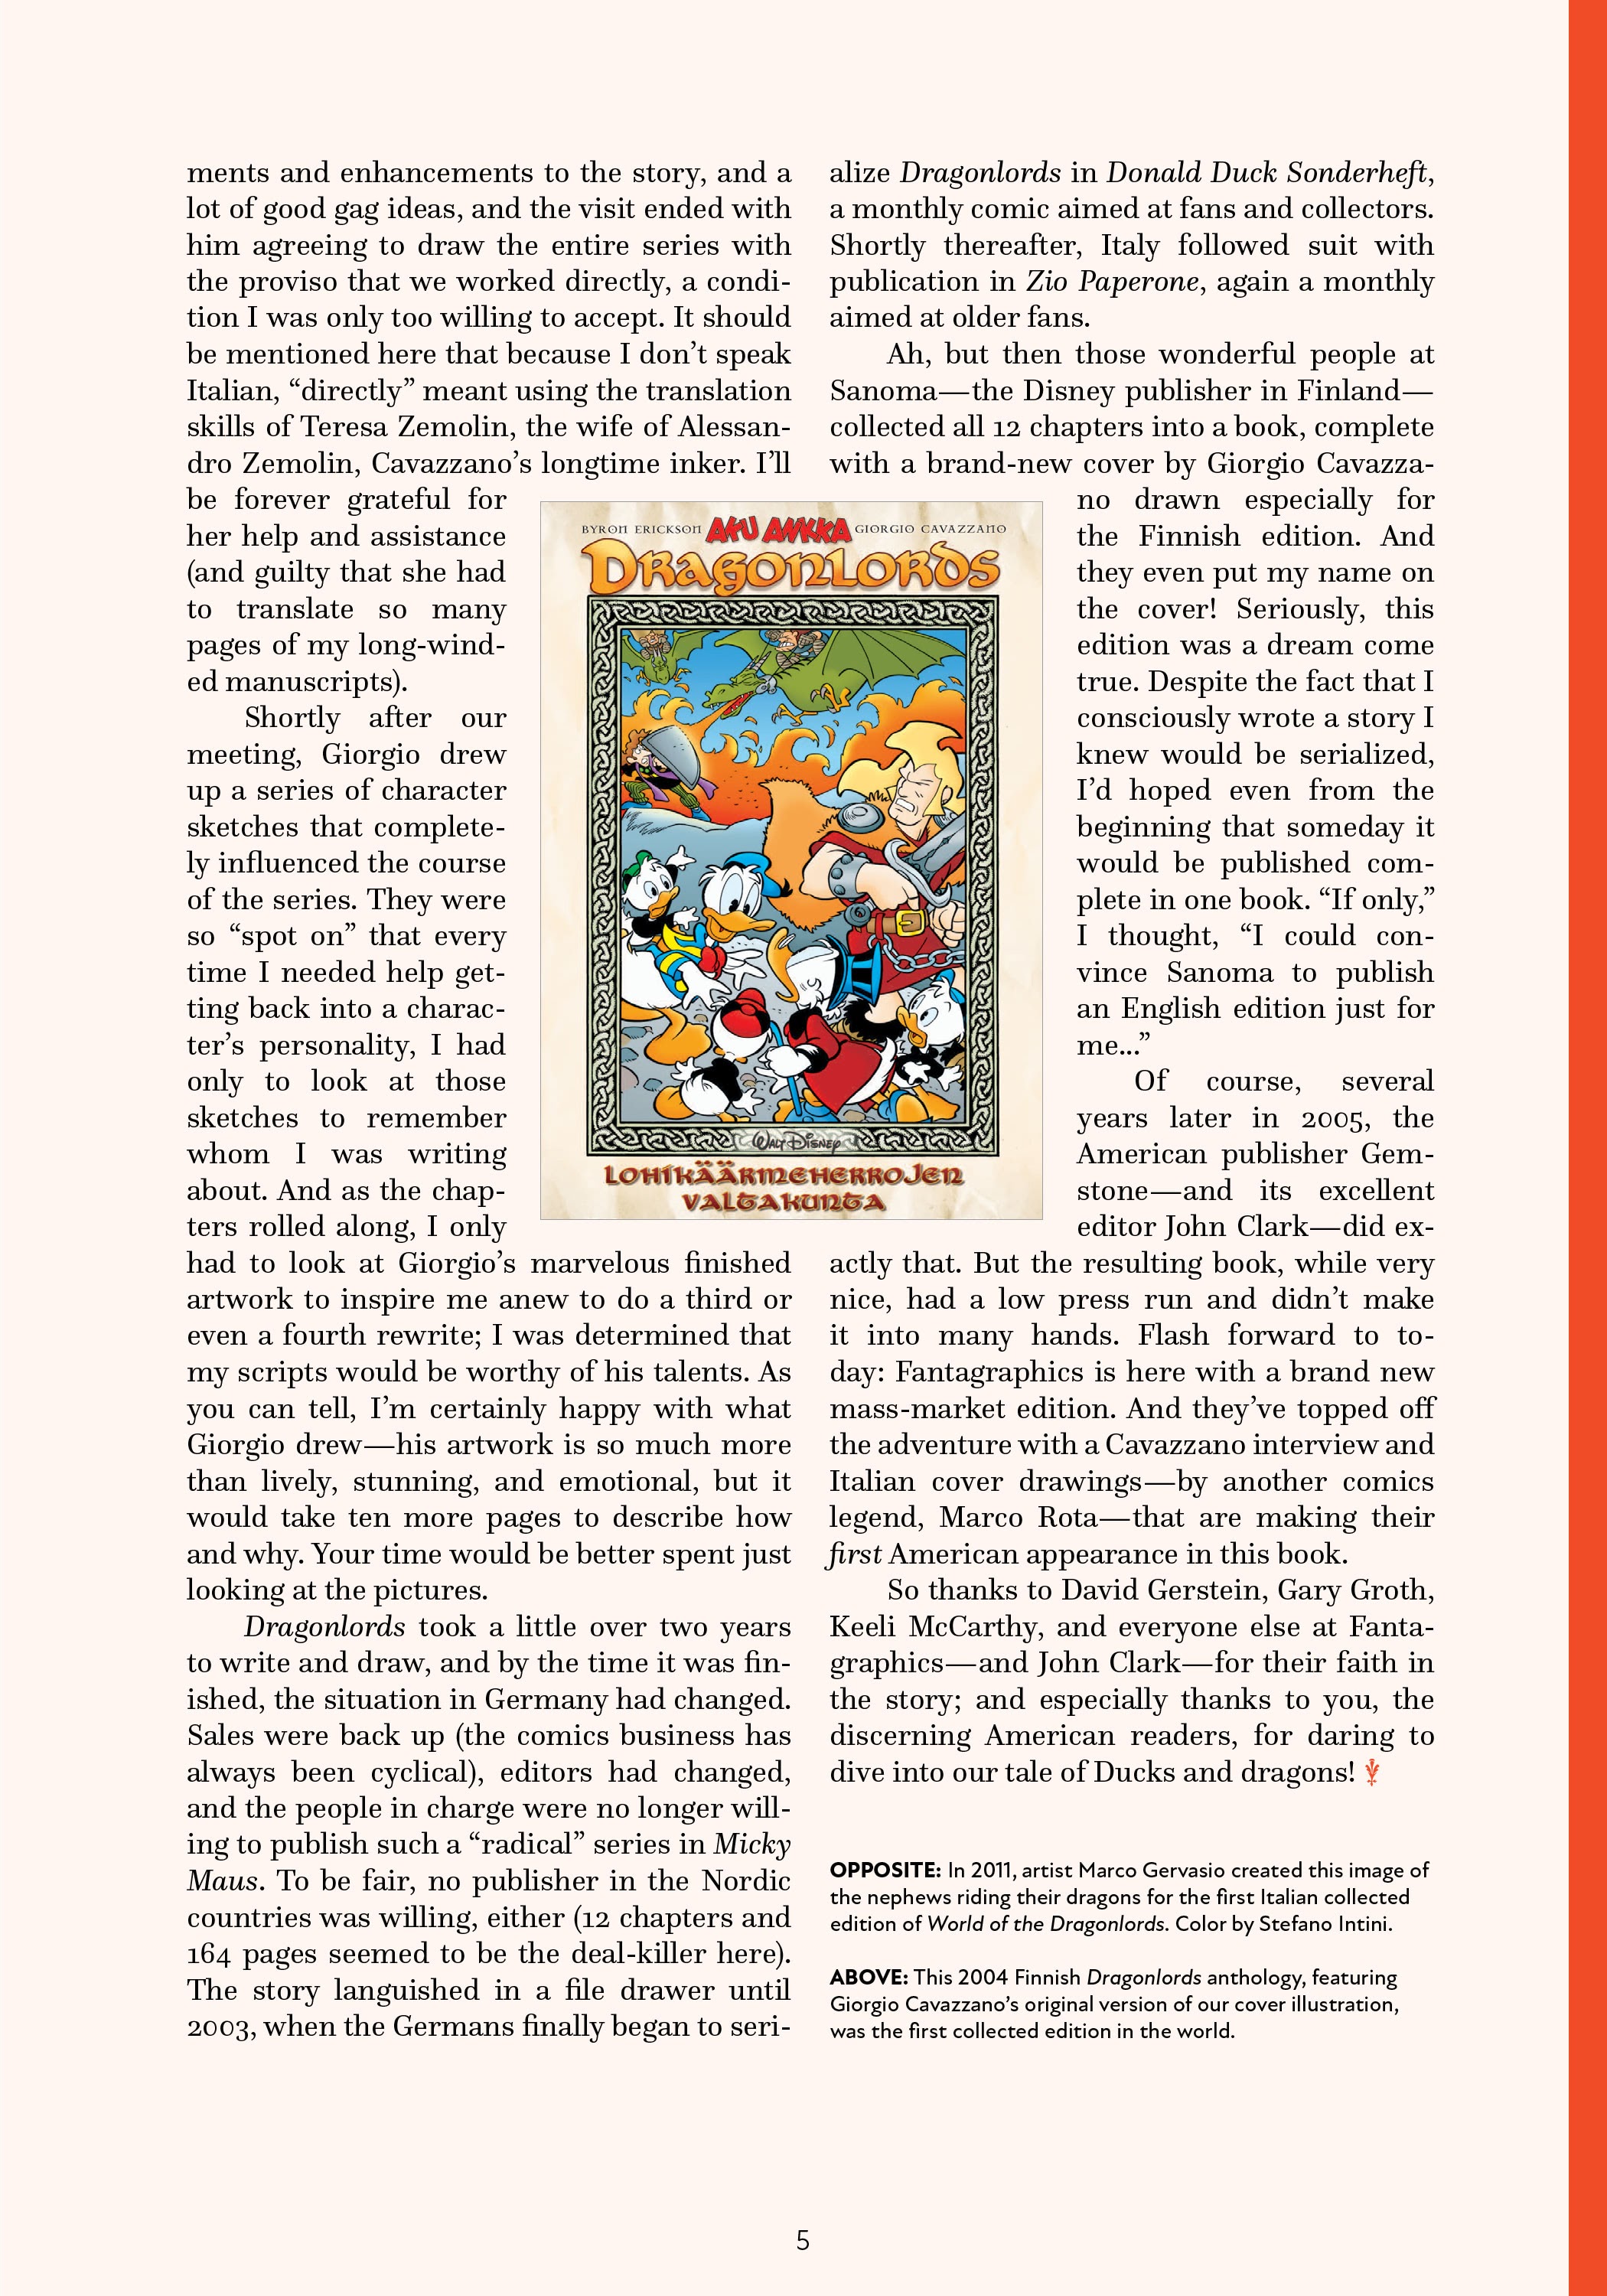 Read online Donald Duck and Uncle Scrooge: World of the Dragonlords comic -  Issue # TPB (Part 1) - 6